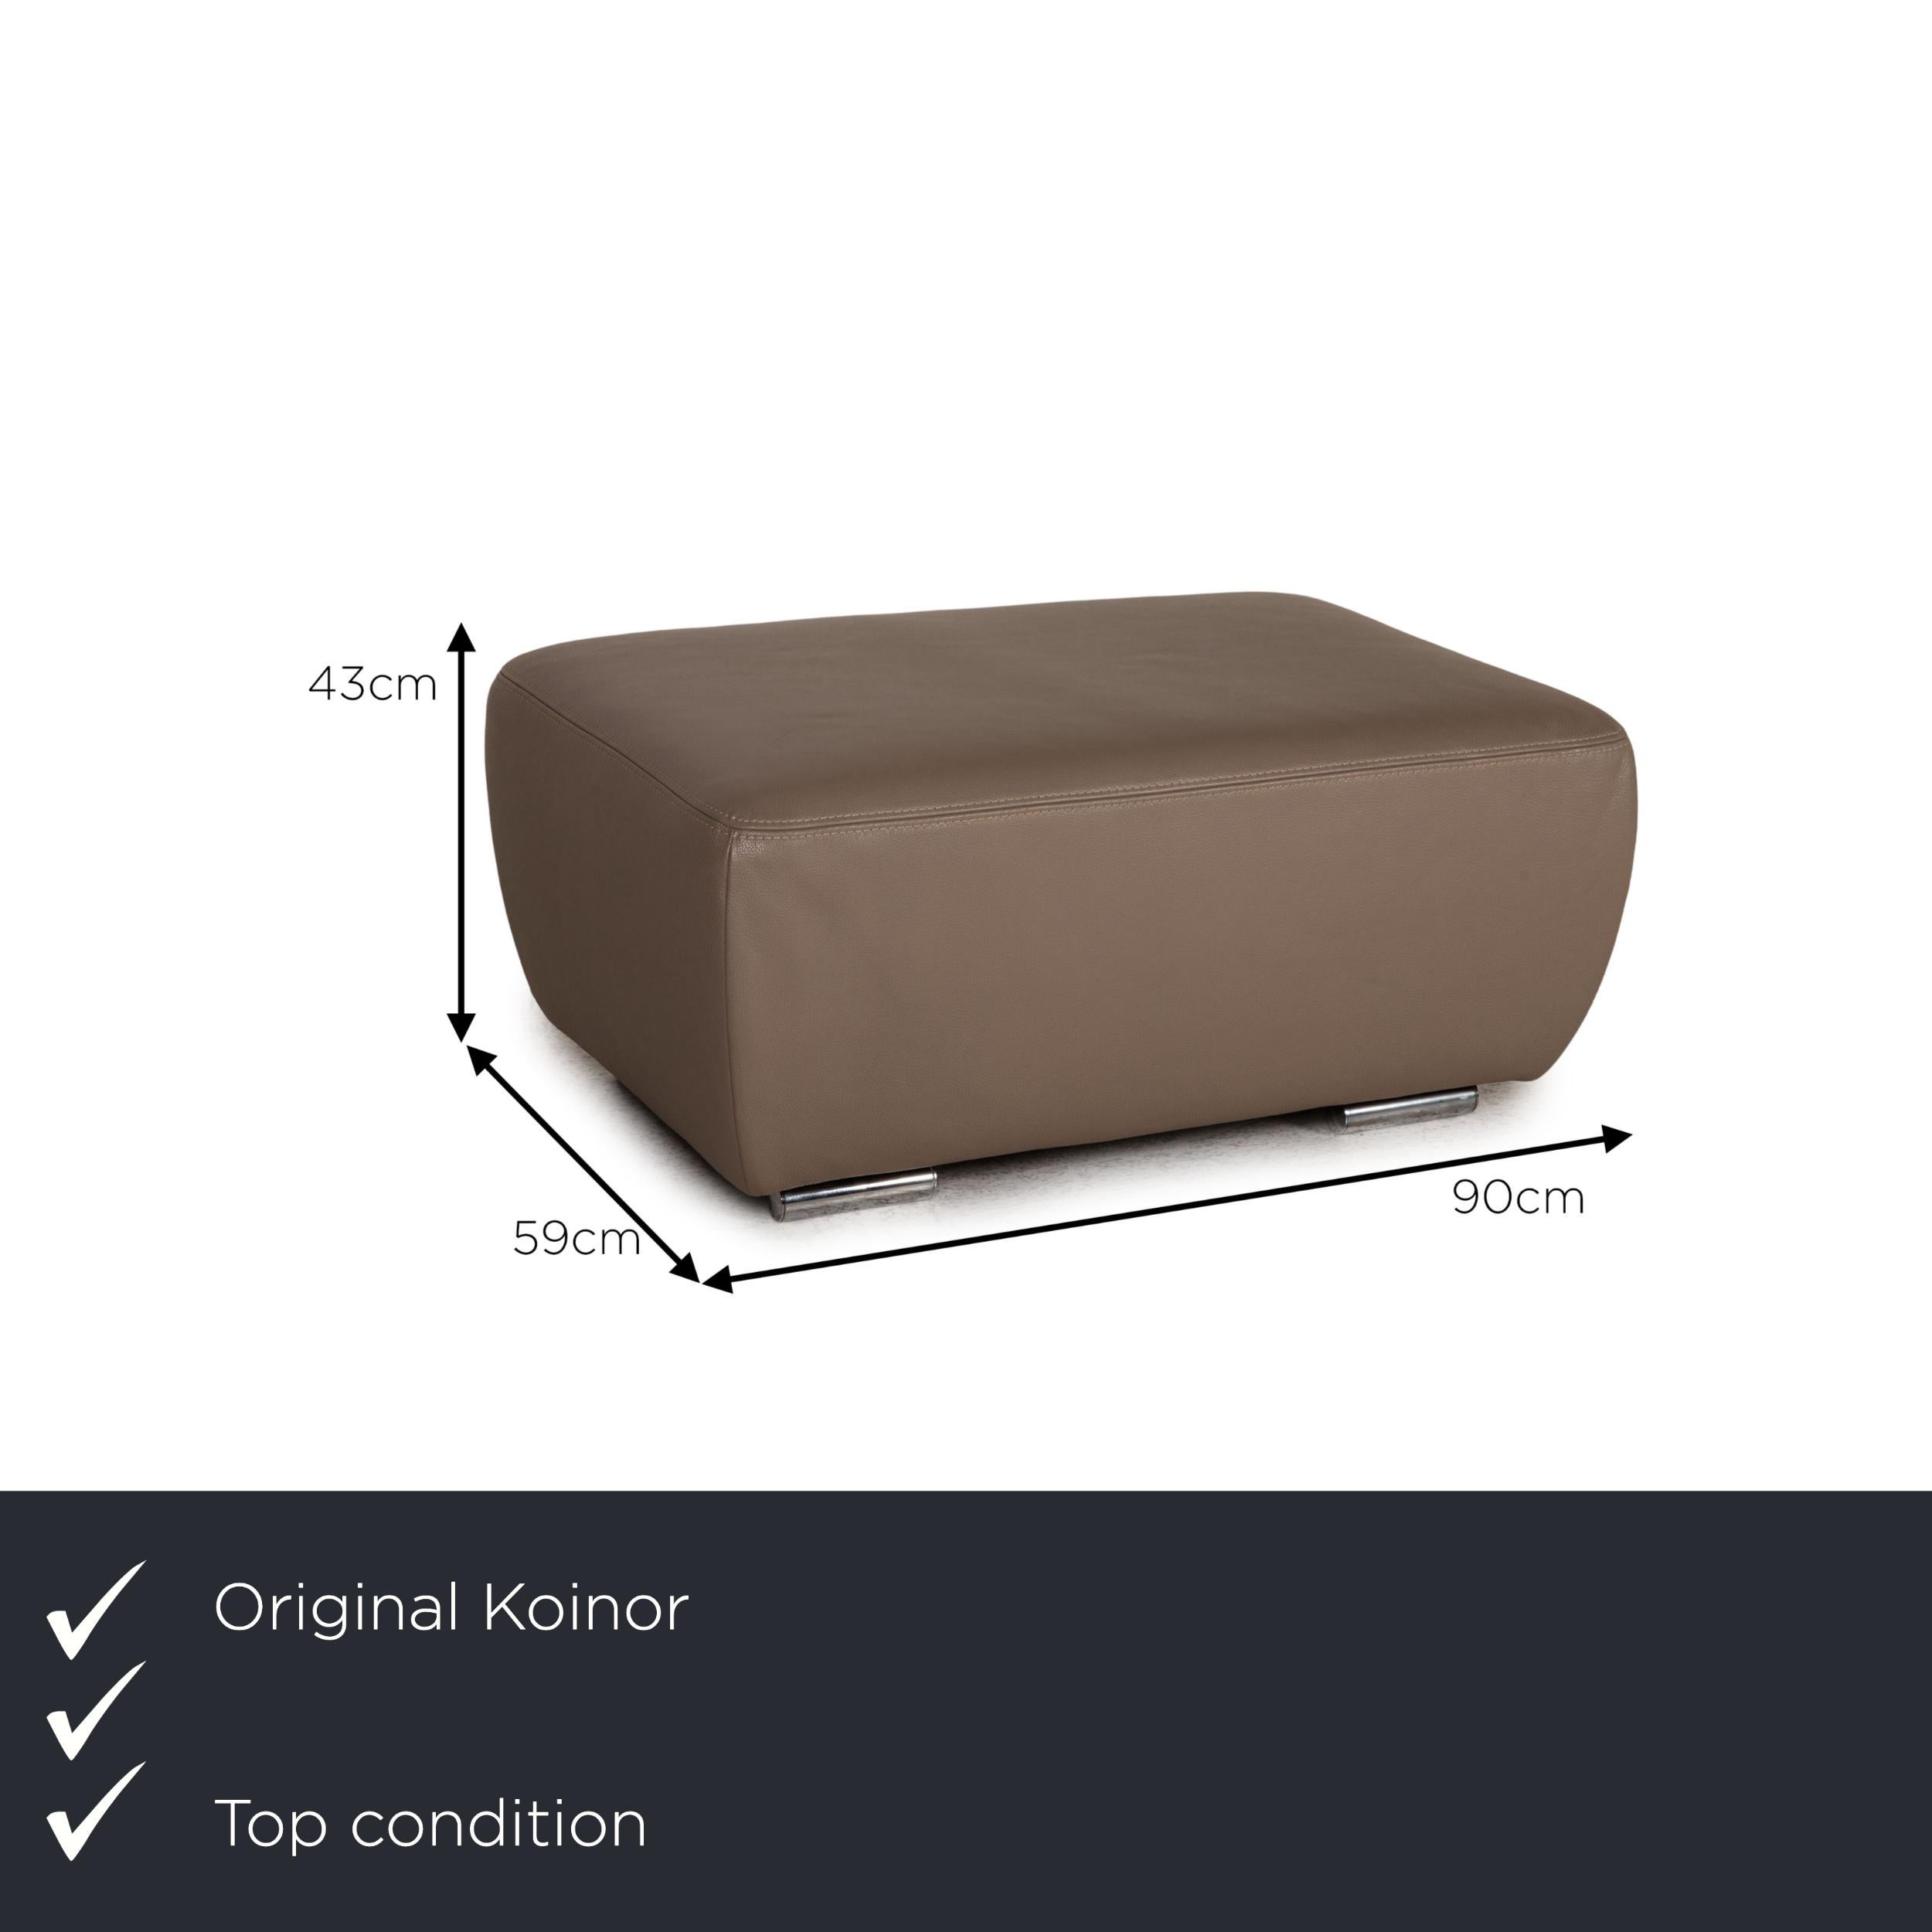 We present to you a Koinor Avanti leather stool beige.

Product measurements in centimeters:

depth: 59
width: 90
height: 43
seat height: 
rest height: 
seat depth: 
seat width: 
back height:

 